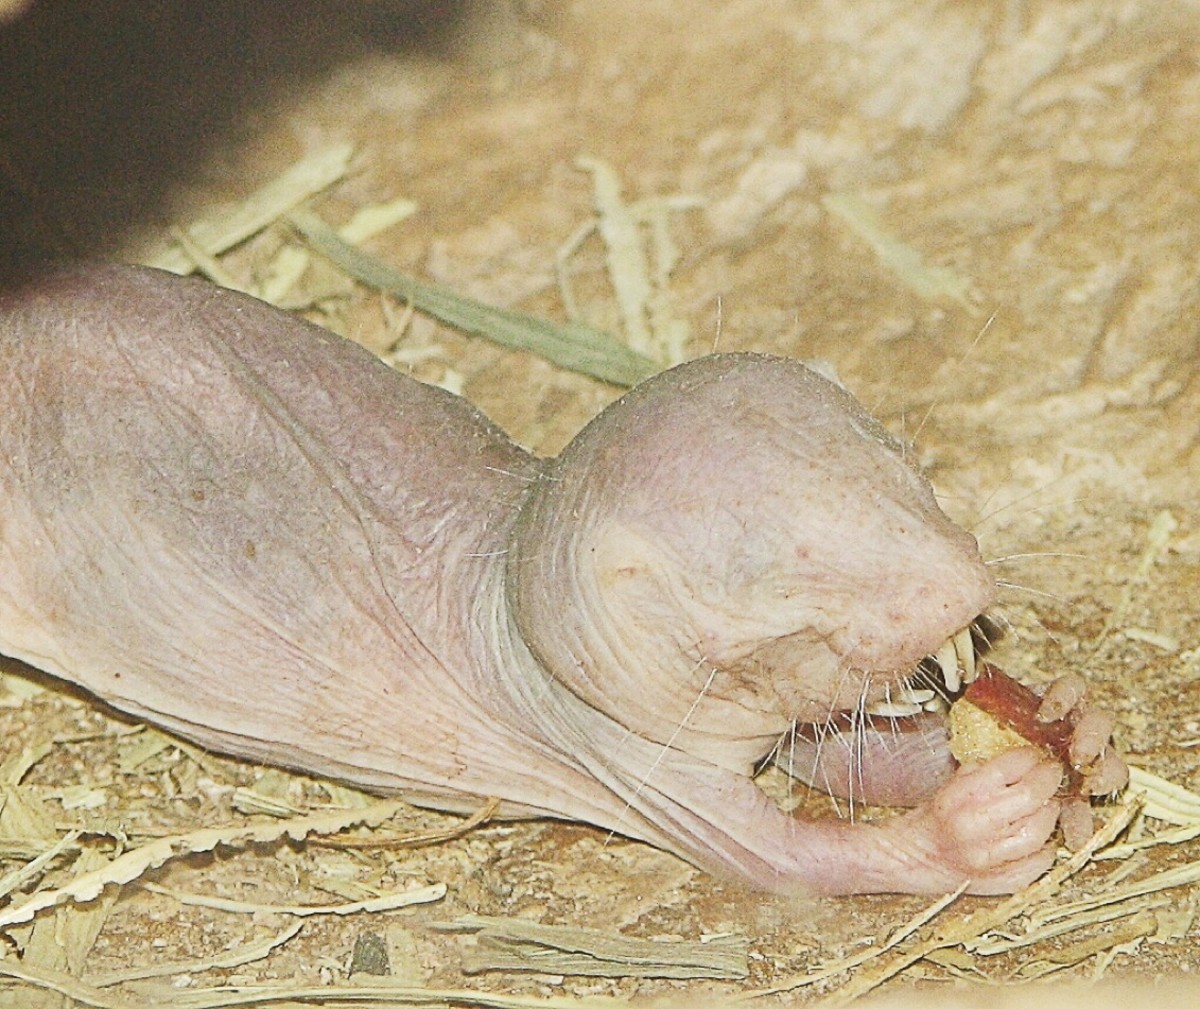 In this photo of a captive naked mole-rat eating, the upper and lower incisors can be clearly seen.